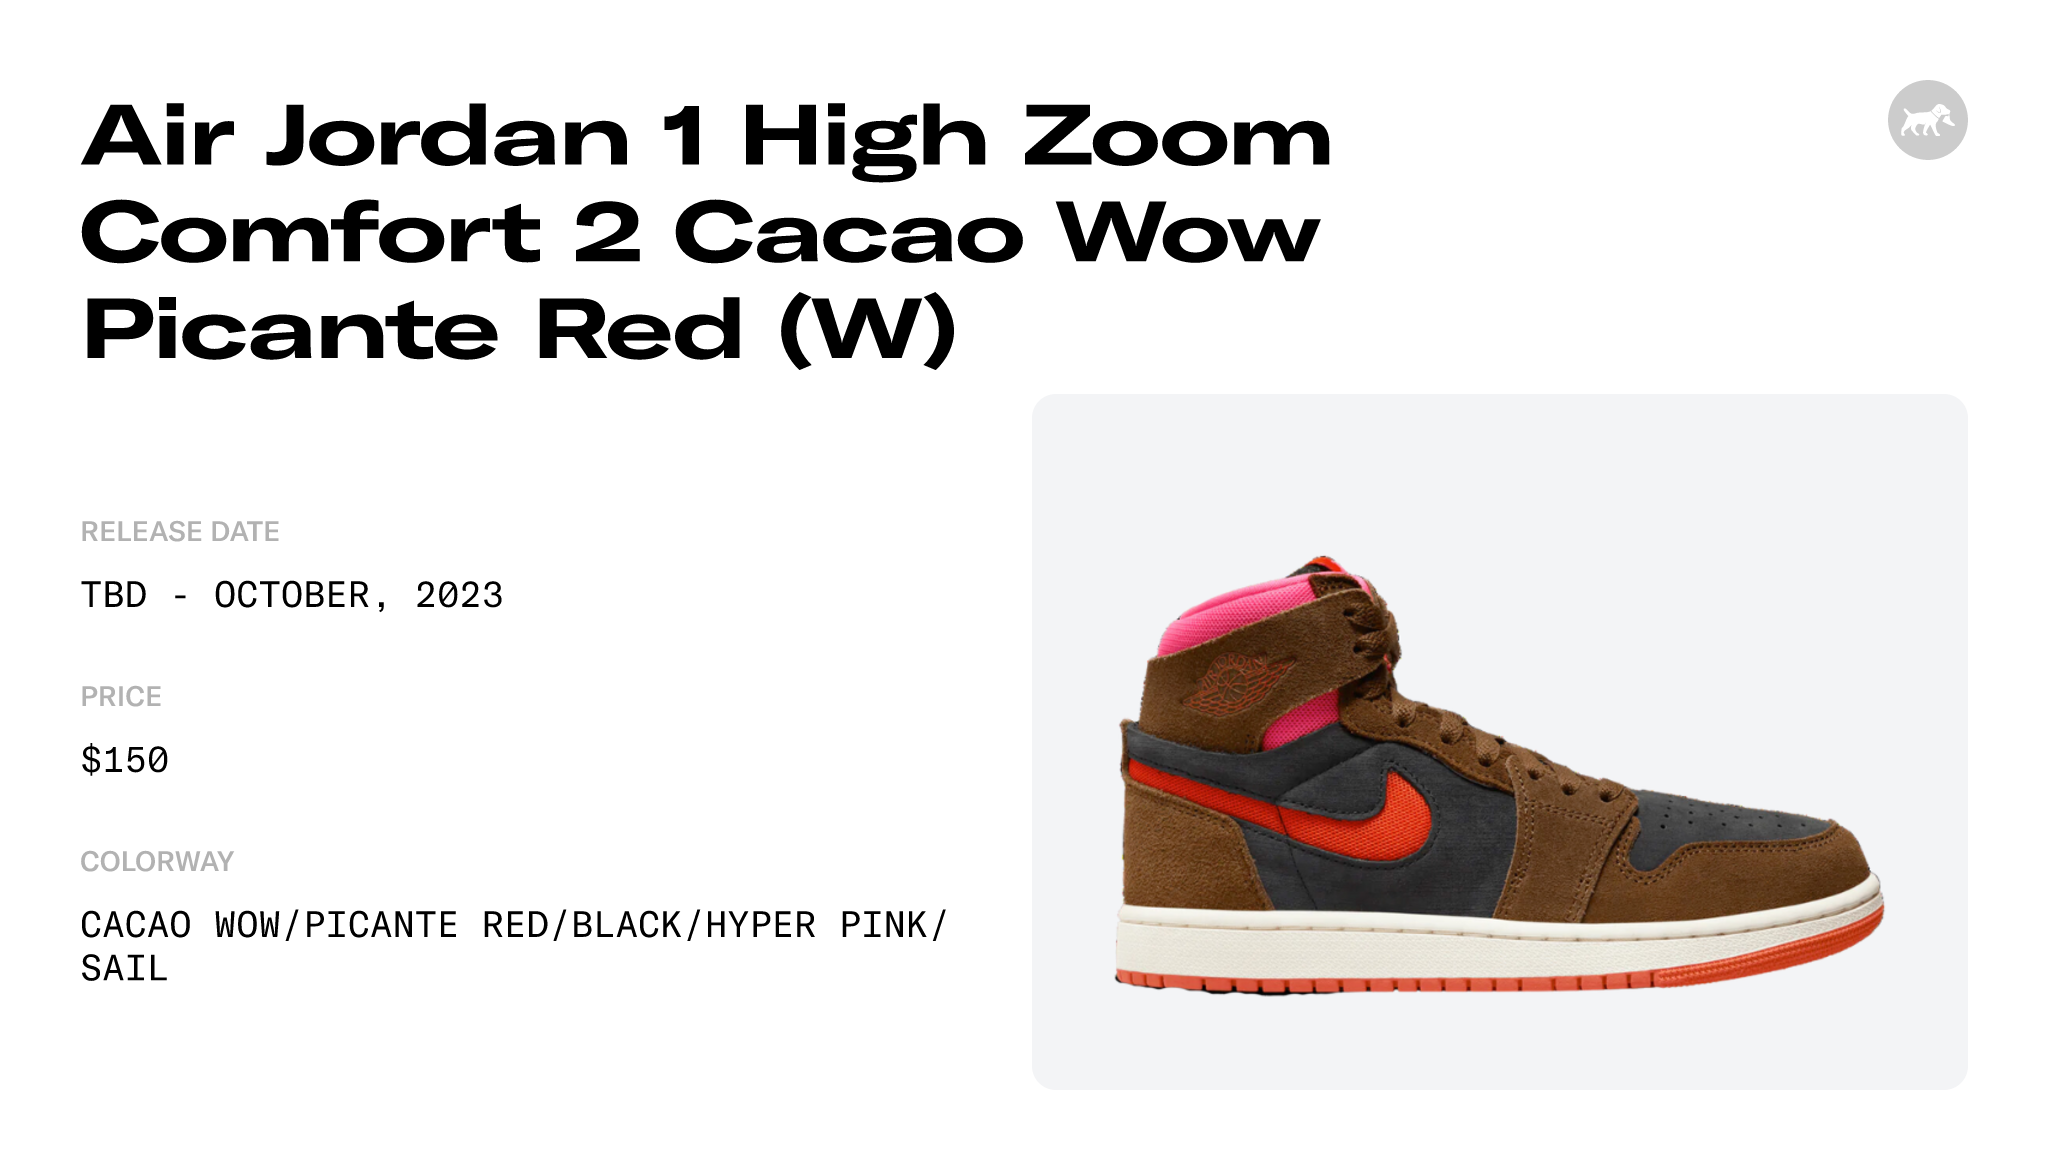 Air Jordan 1 High Zoom Comfort 2 Cacao Wow Picante Red (W